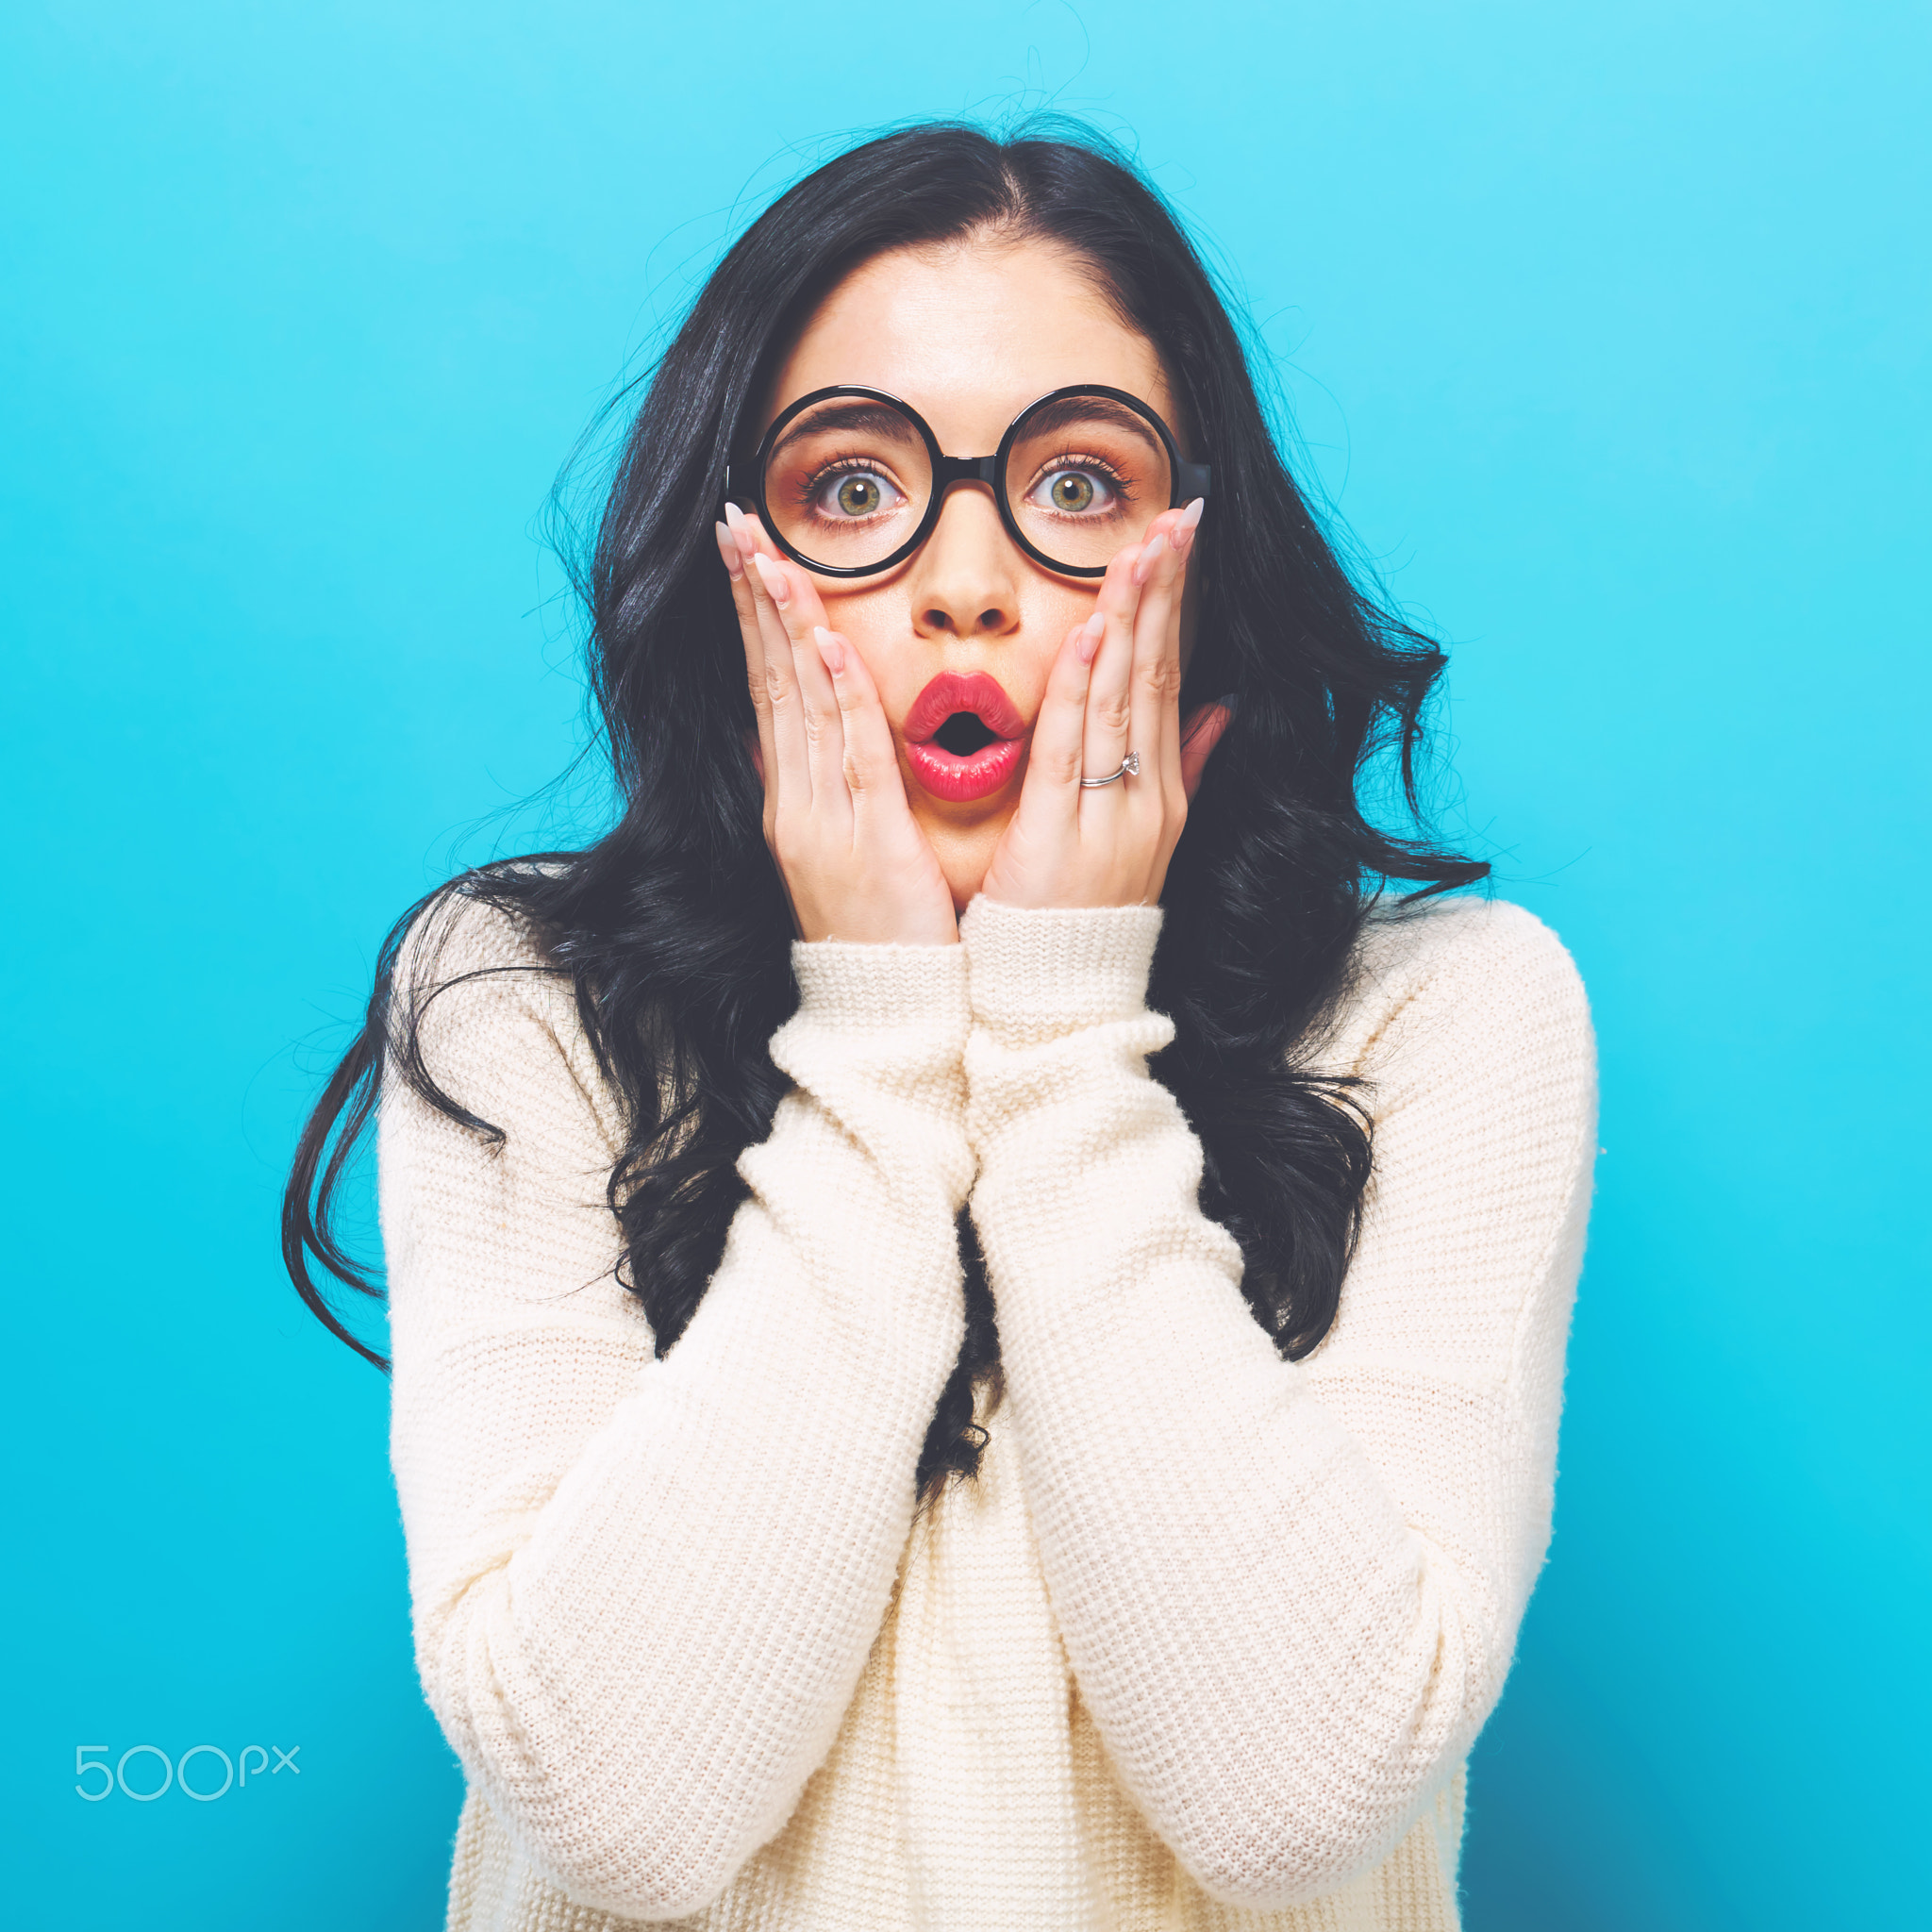 Surprised young woman on a bright background